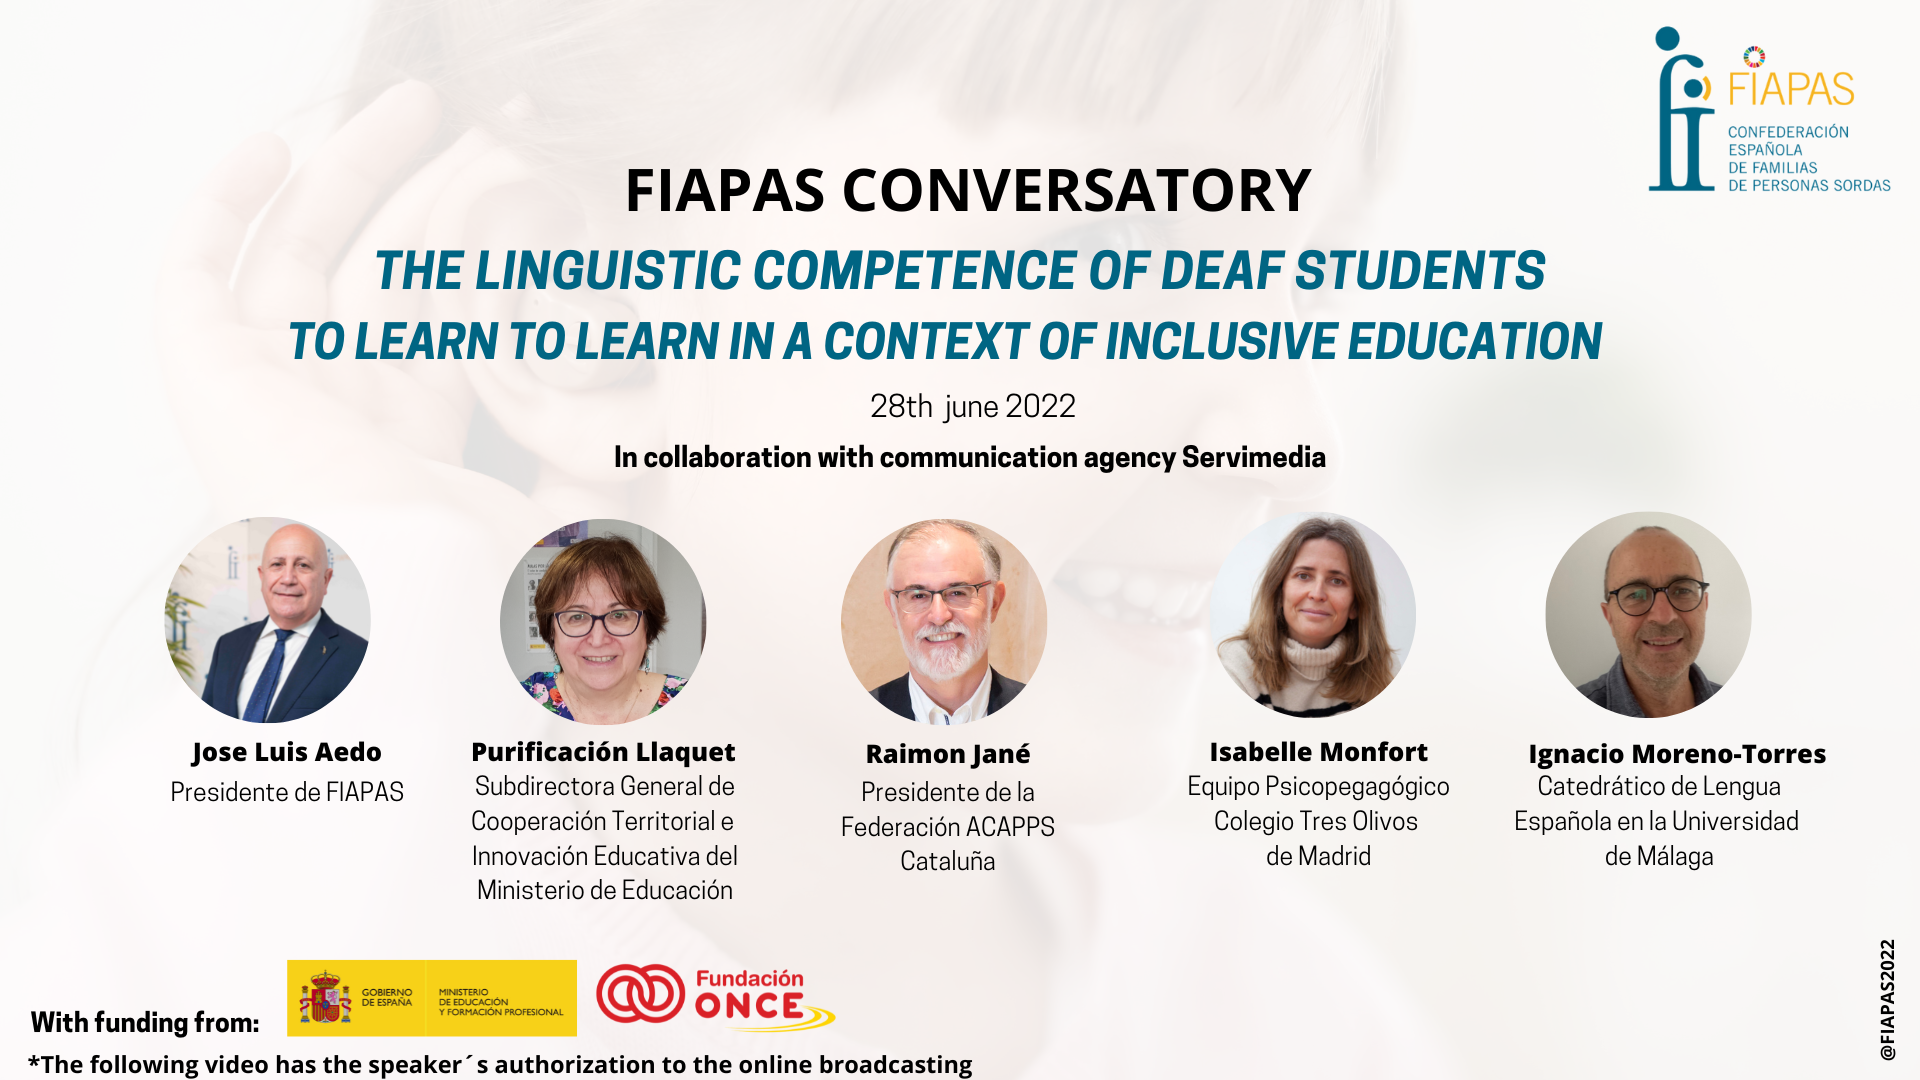 English version: FIAPAS CONVERSATORY: THE LINGUISTIC COMPETENCE OF DEAF STUDENTS TO LEARN TO LEARN IN A CONTEXT OF INCLUSIVE EDUCATION